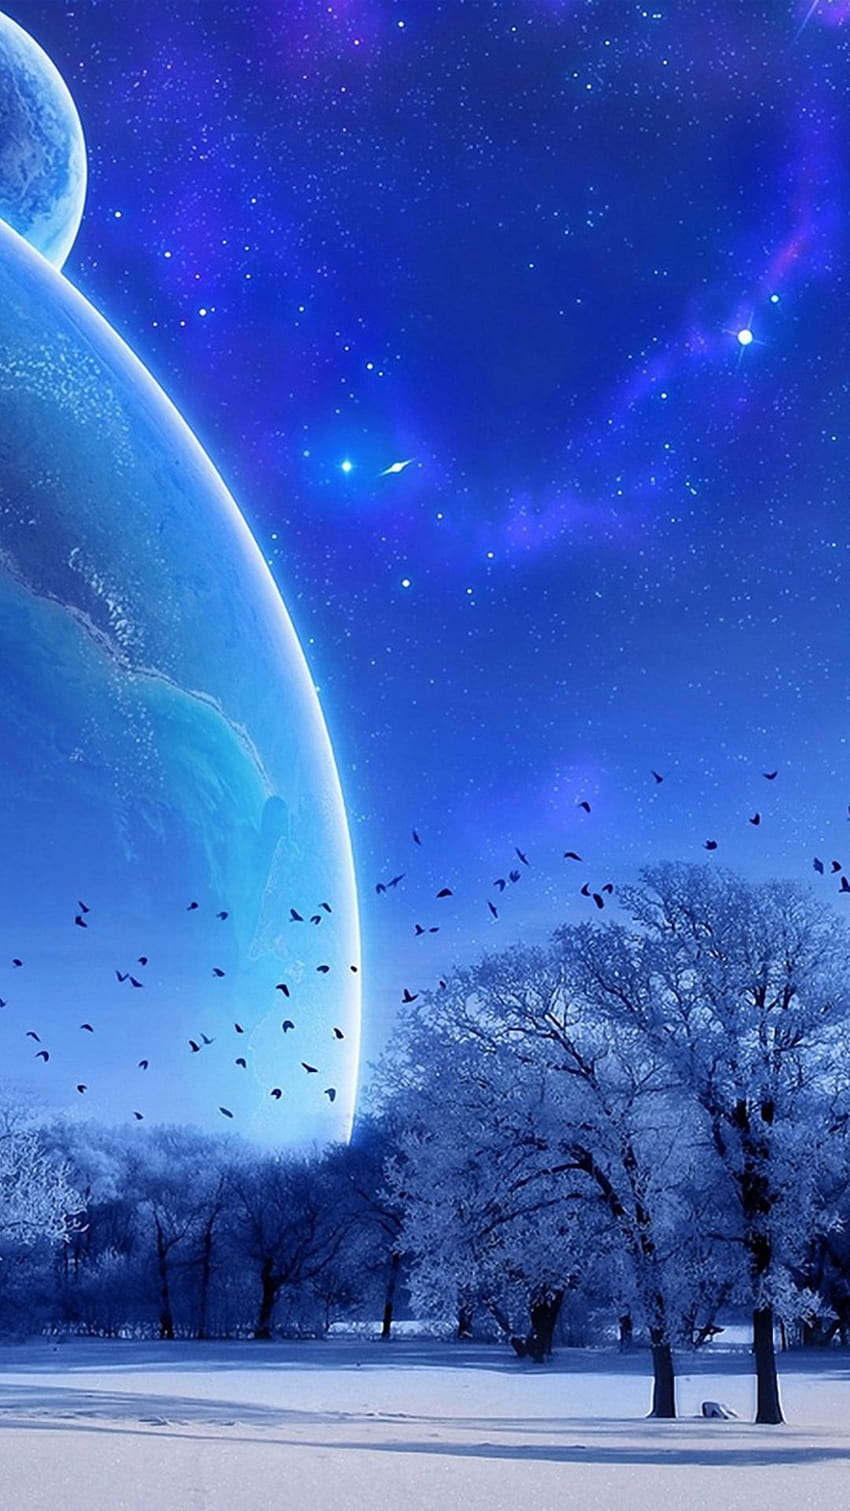 Fantasy Winter Skyscape Space View iPhone 6, winter fanasy HD phone wallpaper